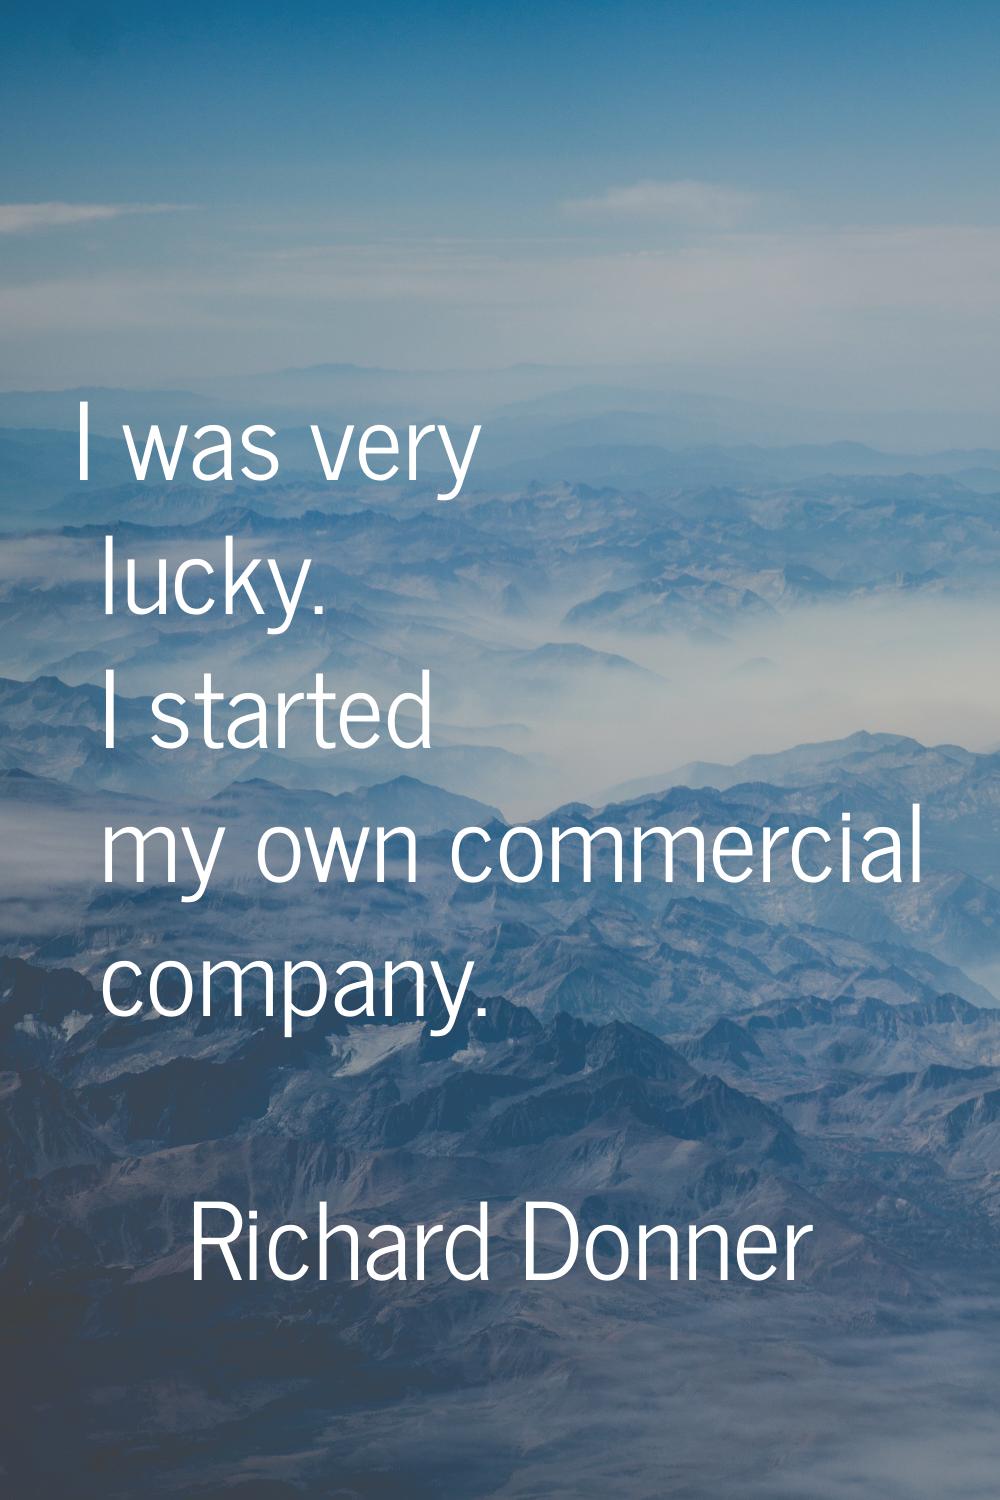 I was very lucky. I started my own commercial company.